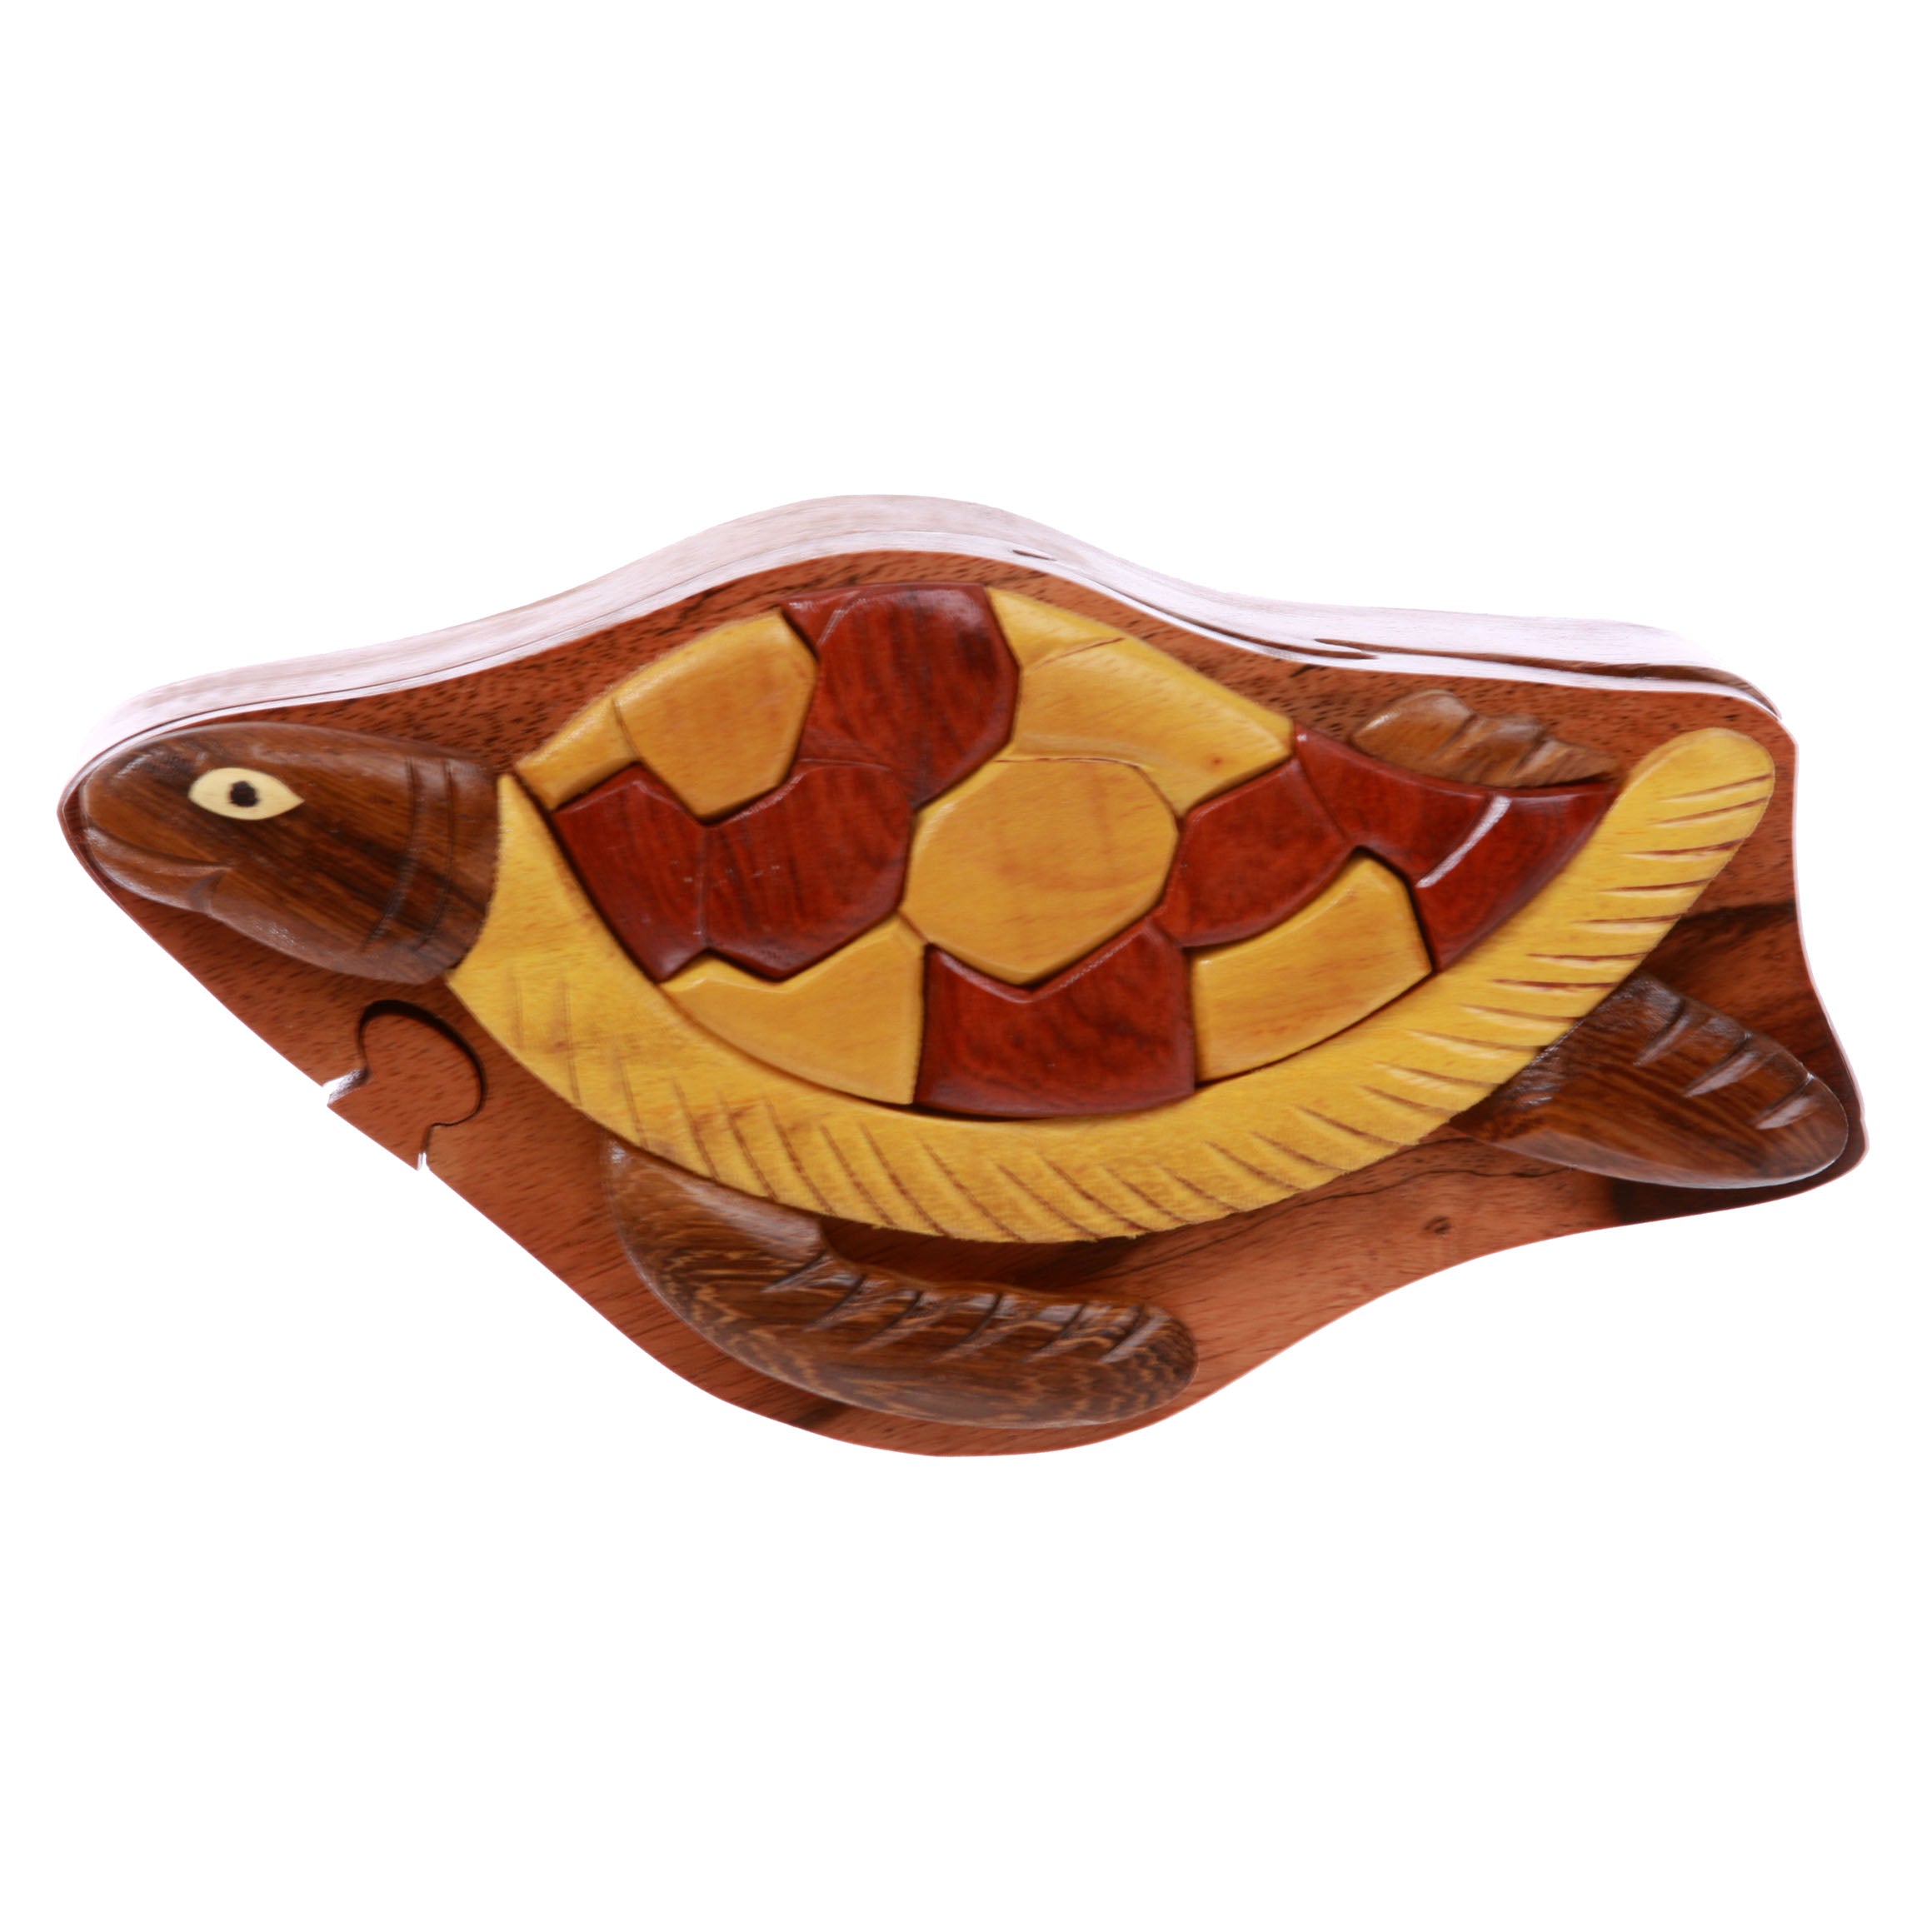 Handcrafted Wooden Turtle Animal Shape Secret Jewelry Puzzle Box - Turtle